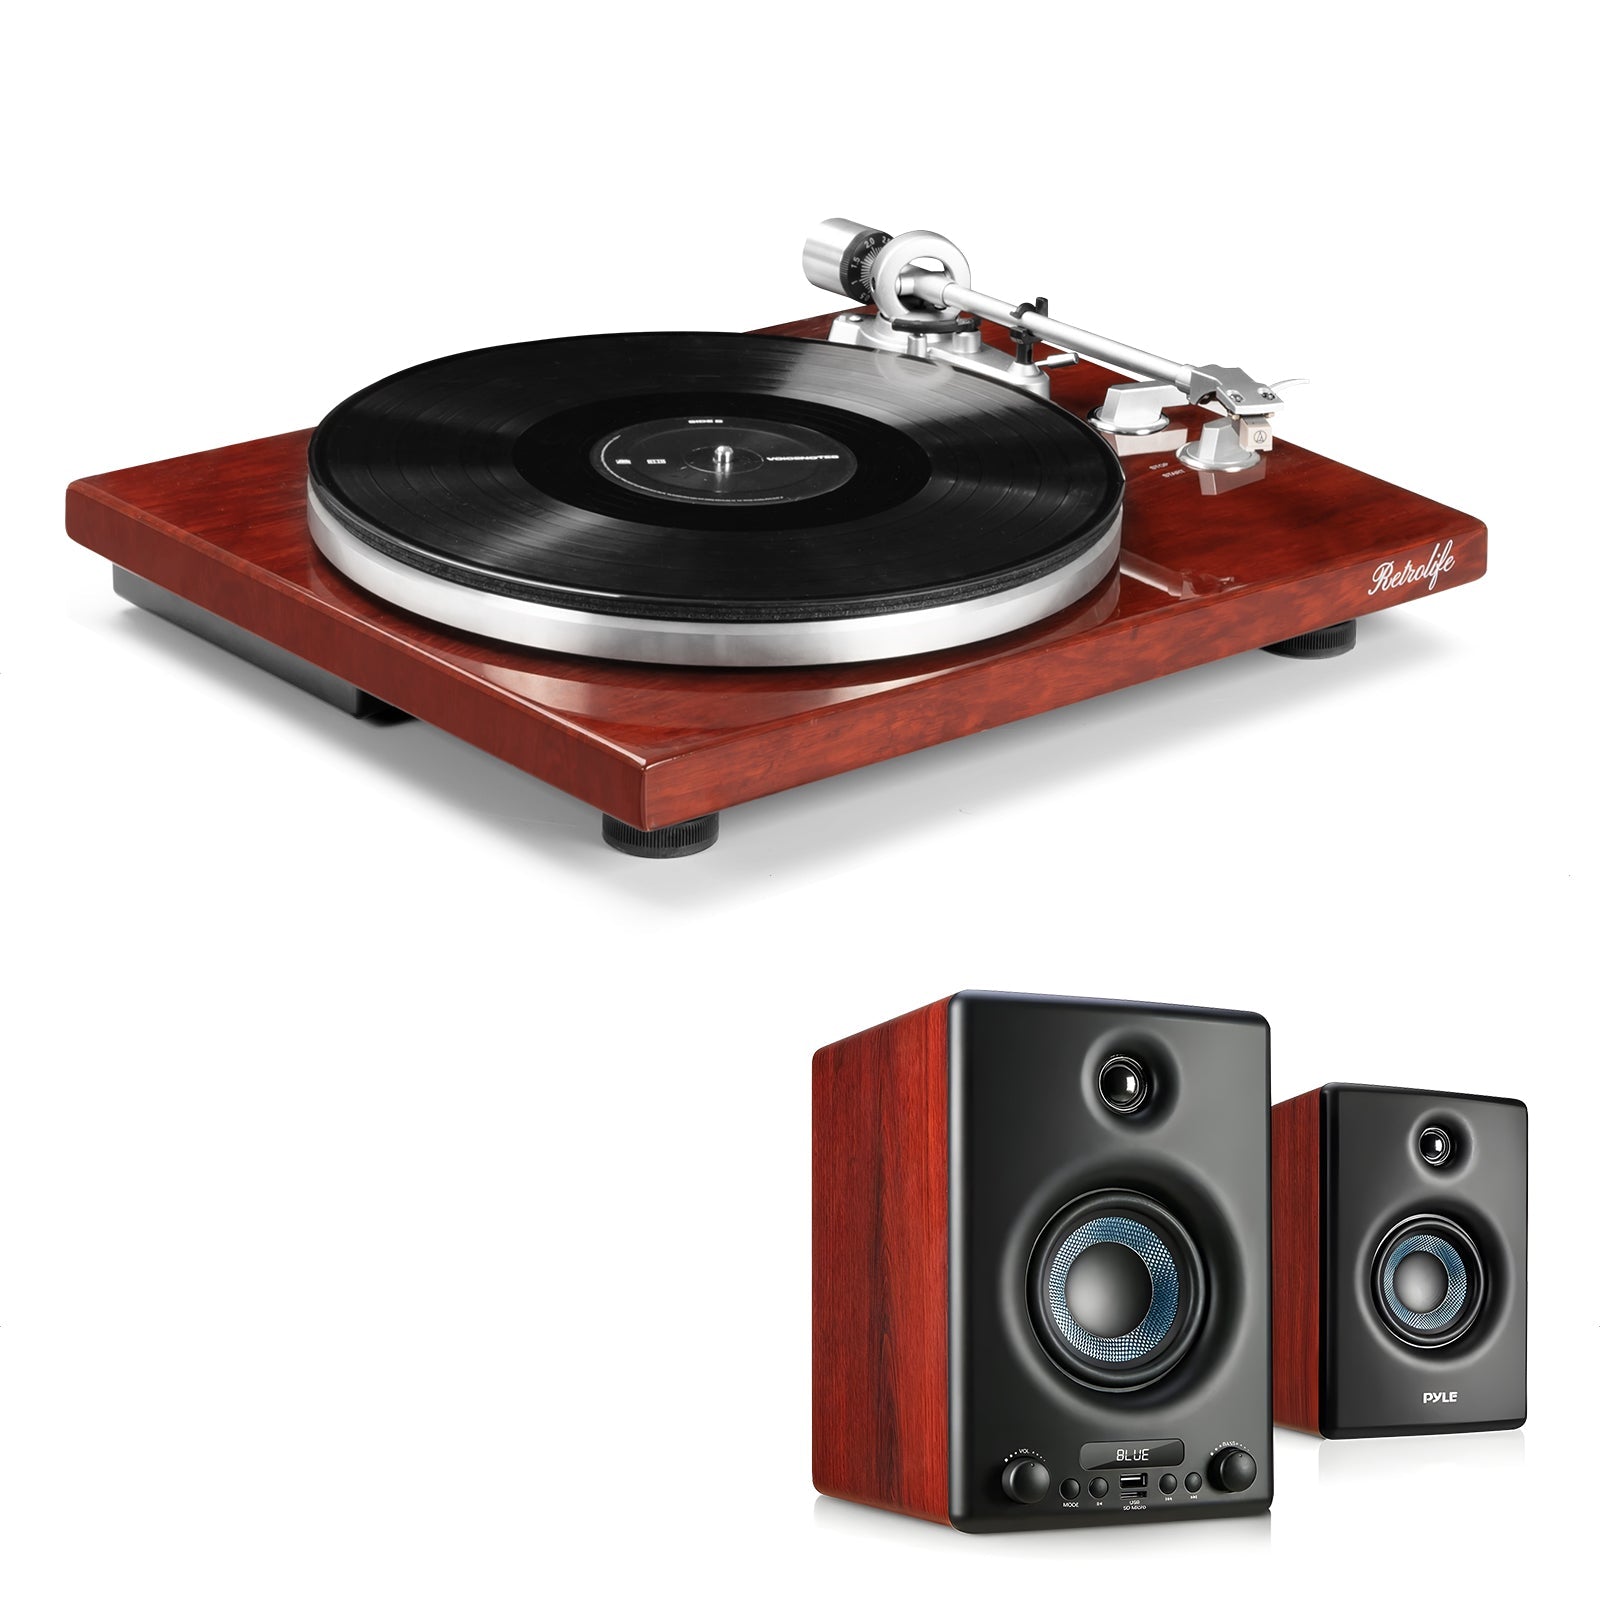 Turntable HQKZ-006 Red Wine with Pyle 300 Watts Active Speakers